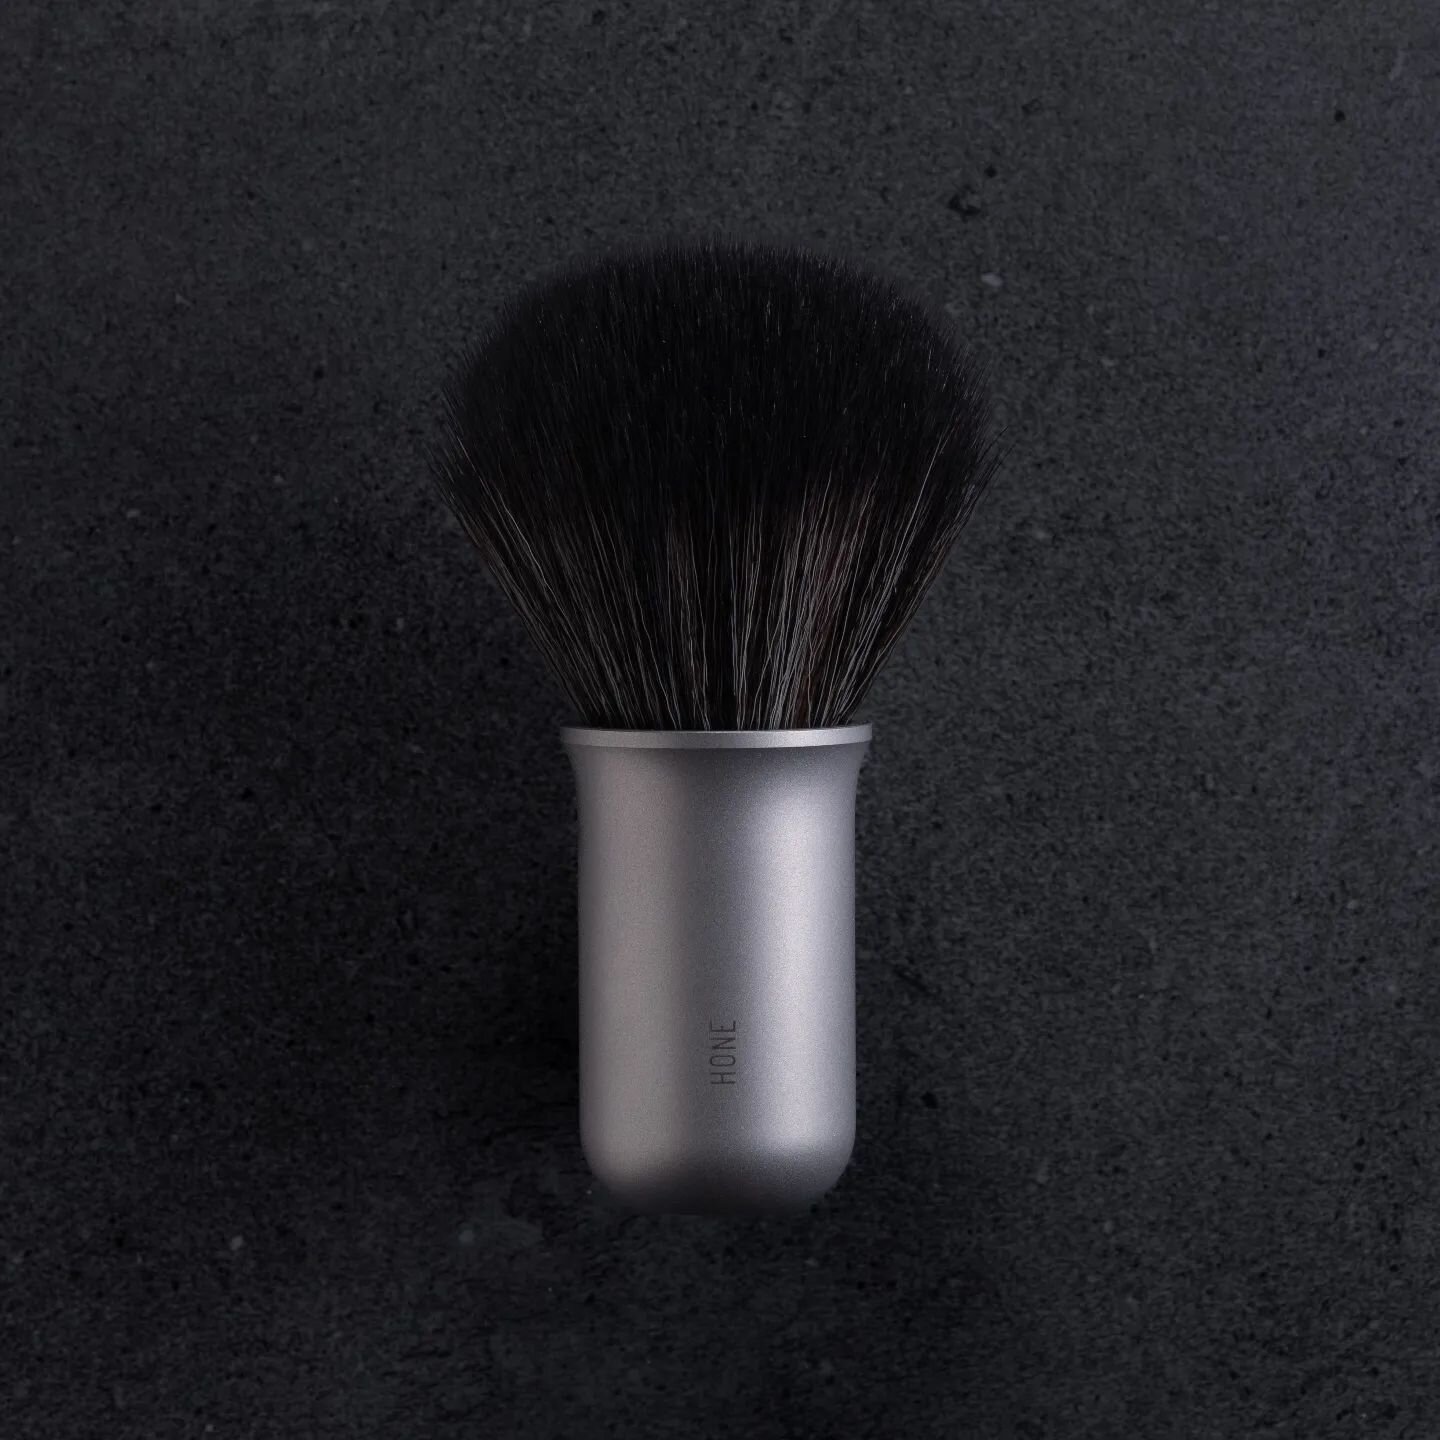 Hone Type B. customisable, serviceable, shaving brush. Stainless steel. CNC machined. Individually numbered. Here with the G5B from @apshaveco 
&bull; 
Launching November 11th 
&bull;
#shavelikeapro #shavingbrush #shaving #shavingbrushknots #cncmachi